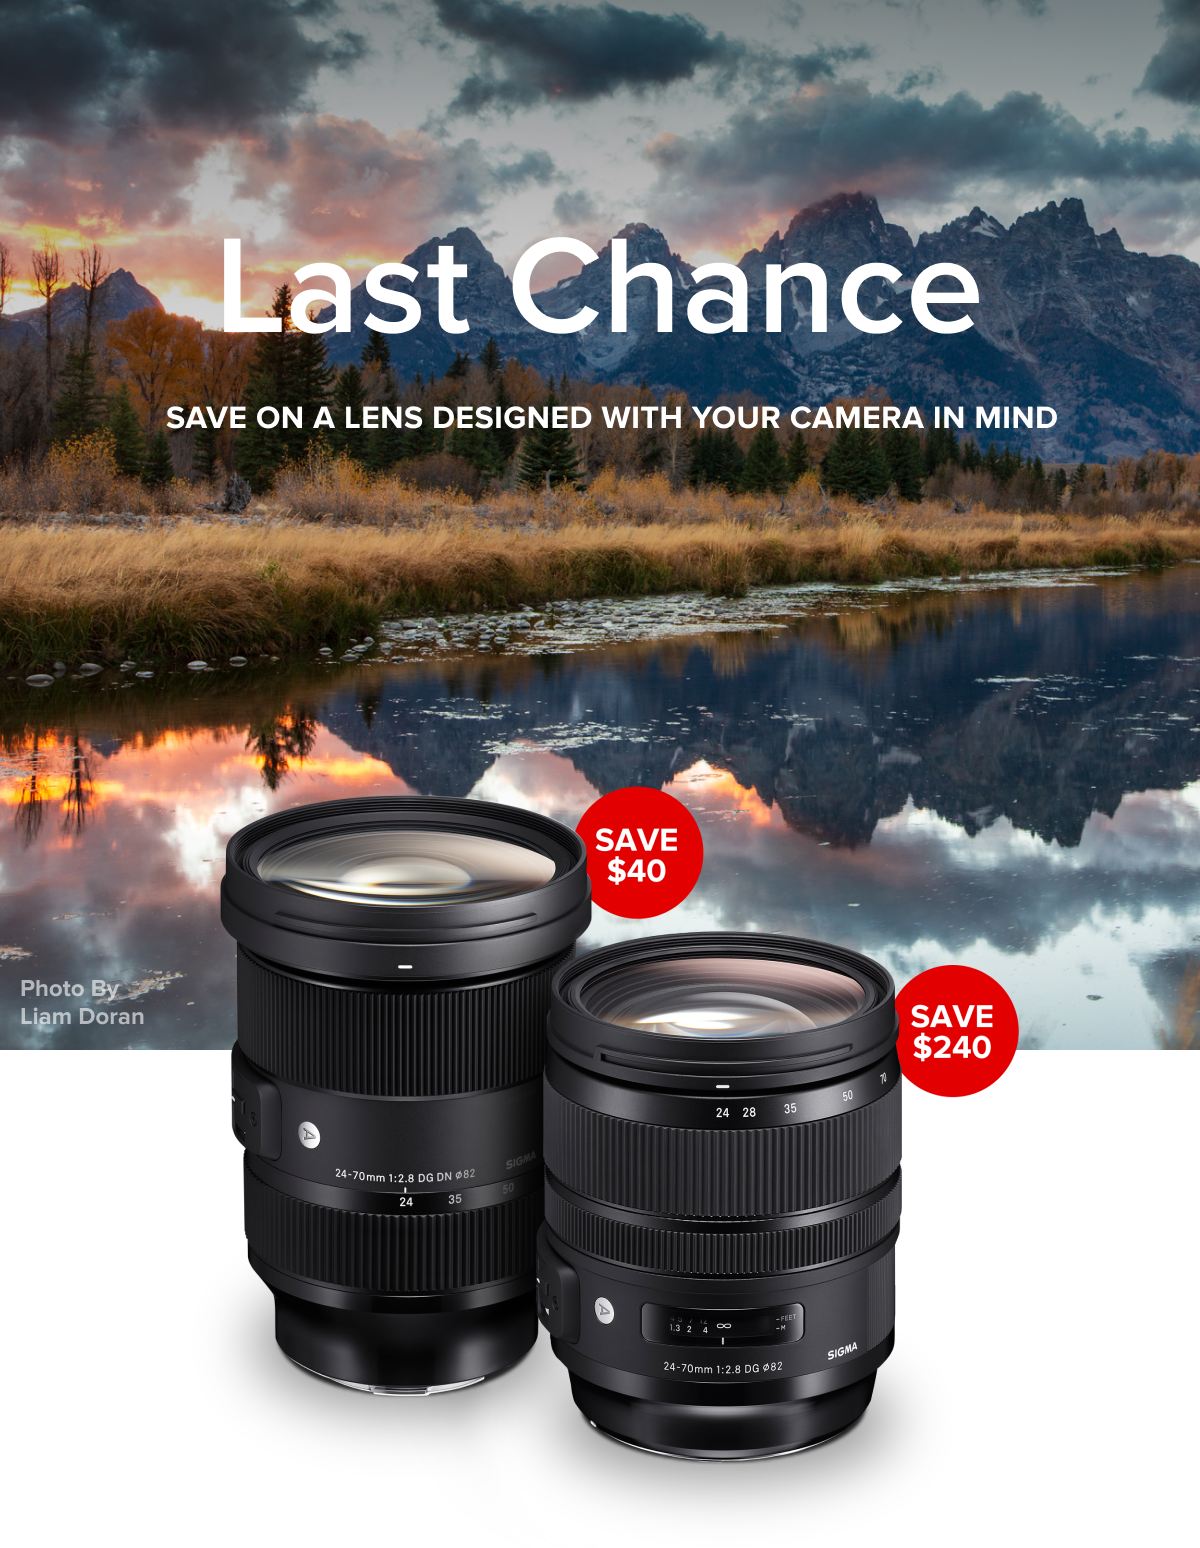 Last Chance - Save on a lens designed with your camera in mind